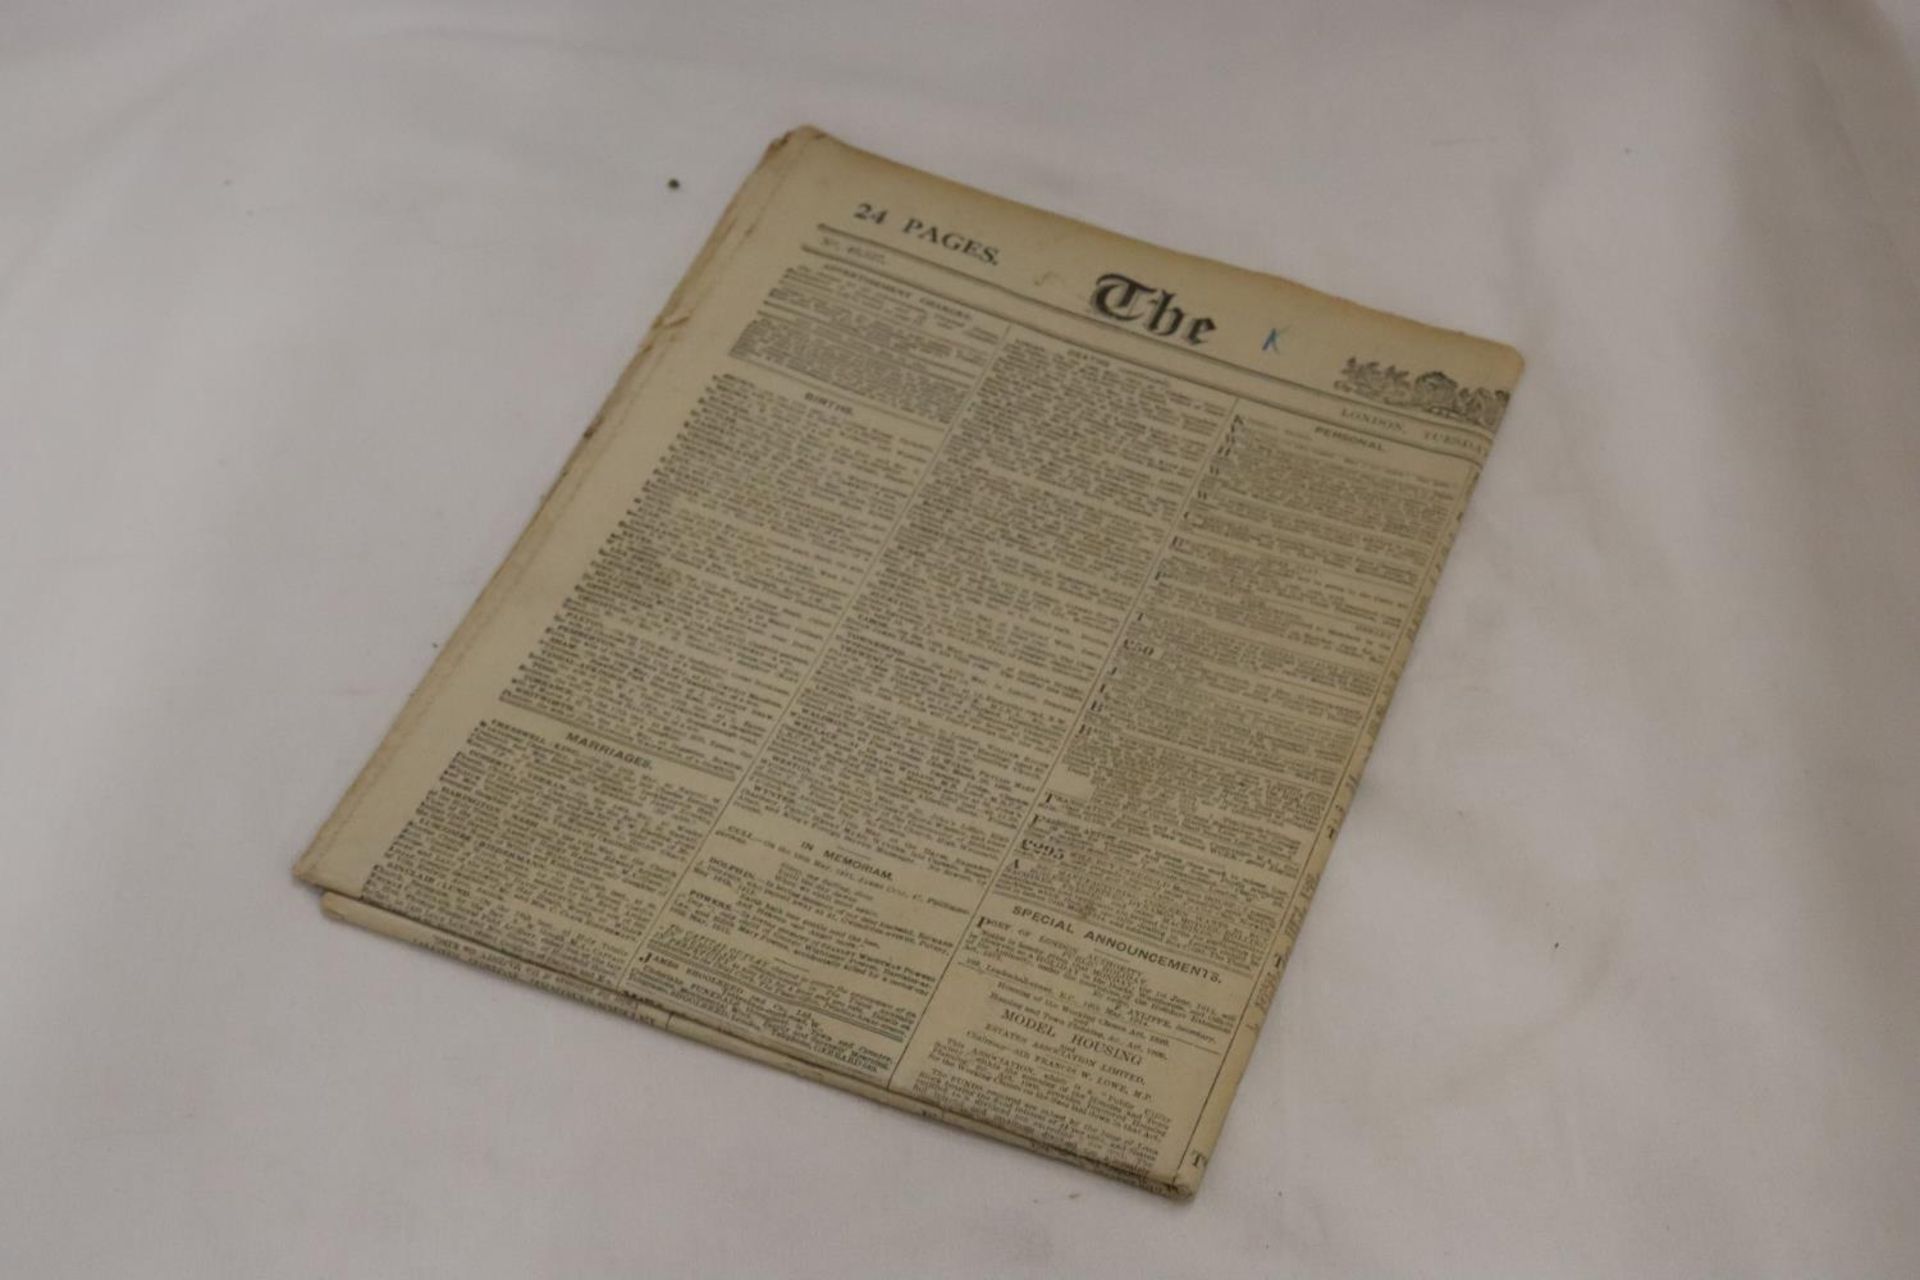 A VINTAGE 'THE TIMES' NEWSPAPER DATED TUESDAY, MAY 19, 1914